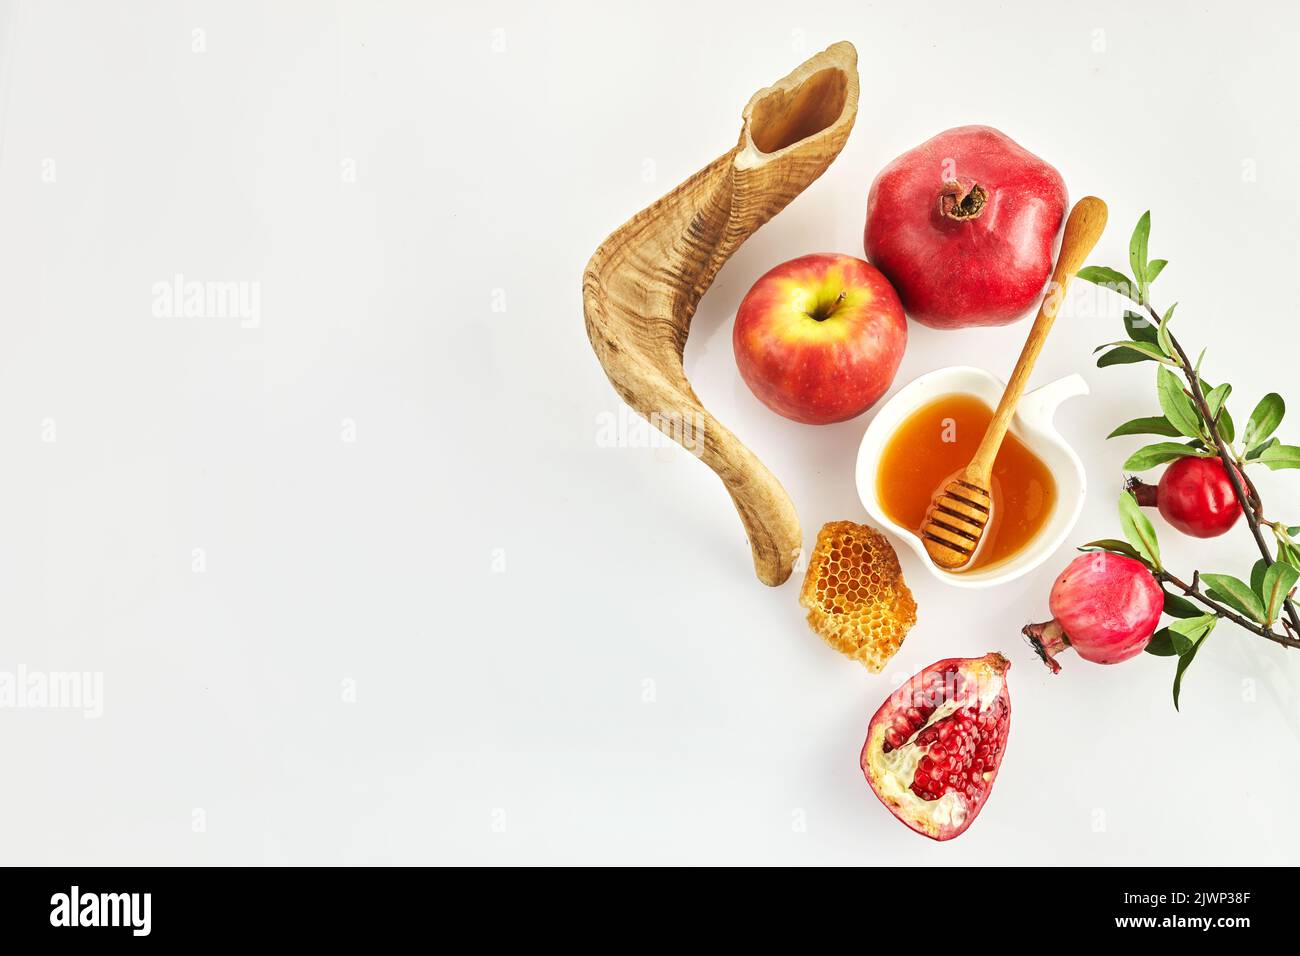 Rosh hashanah, jewish New Year holiday concept. Pomegranate, apples and honey traditional products for celebration Stock Photo